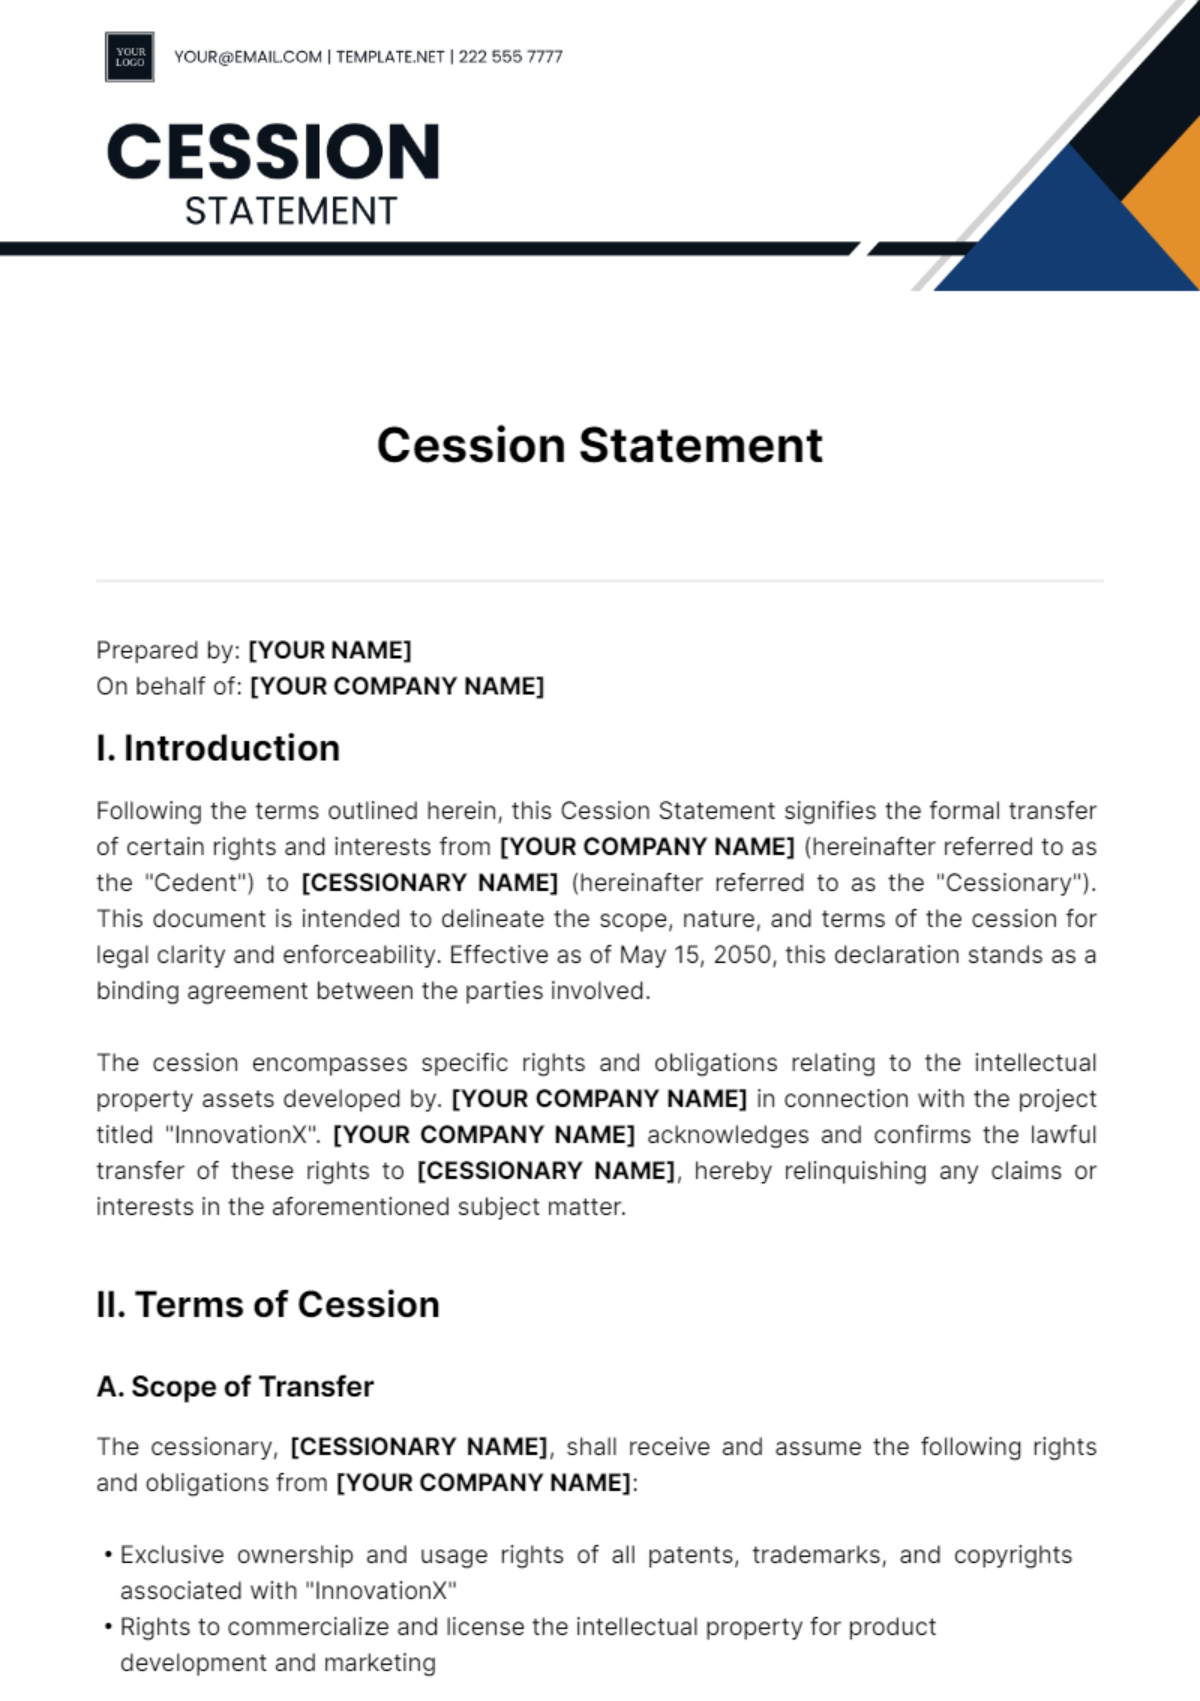 Cession Statement Template